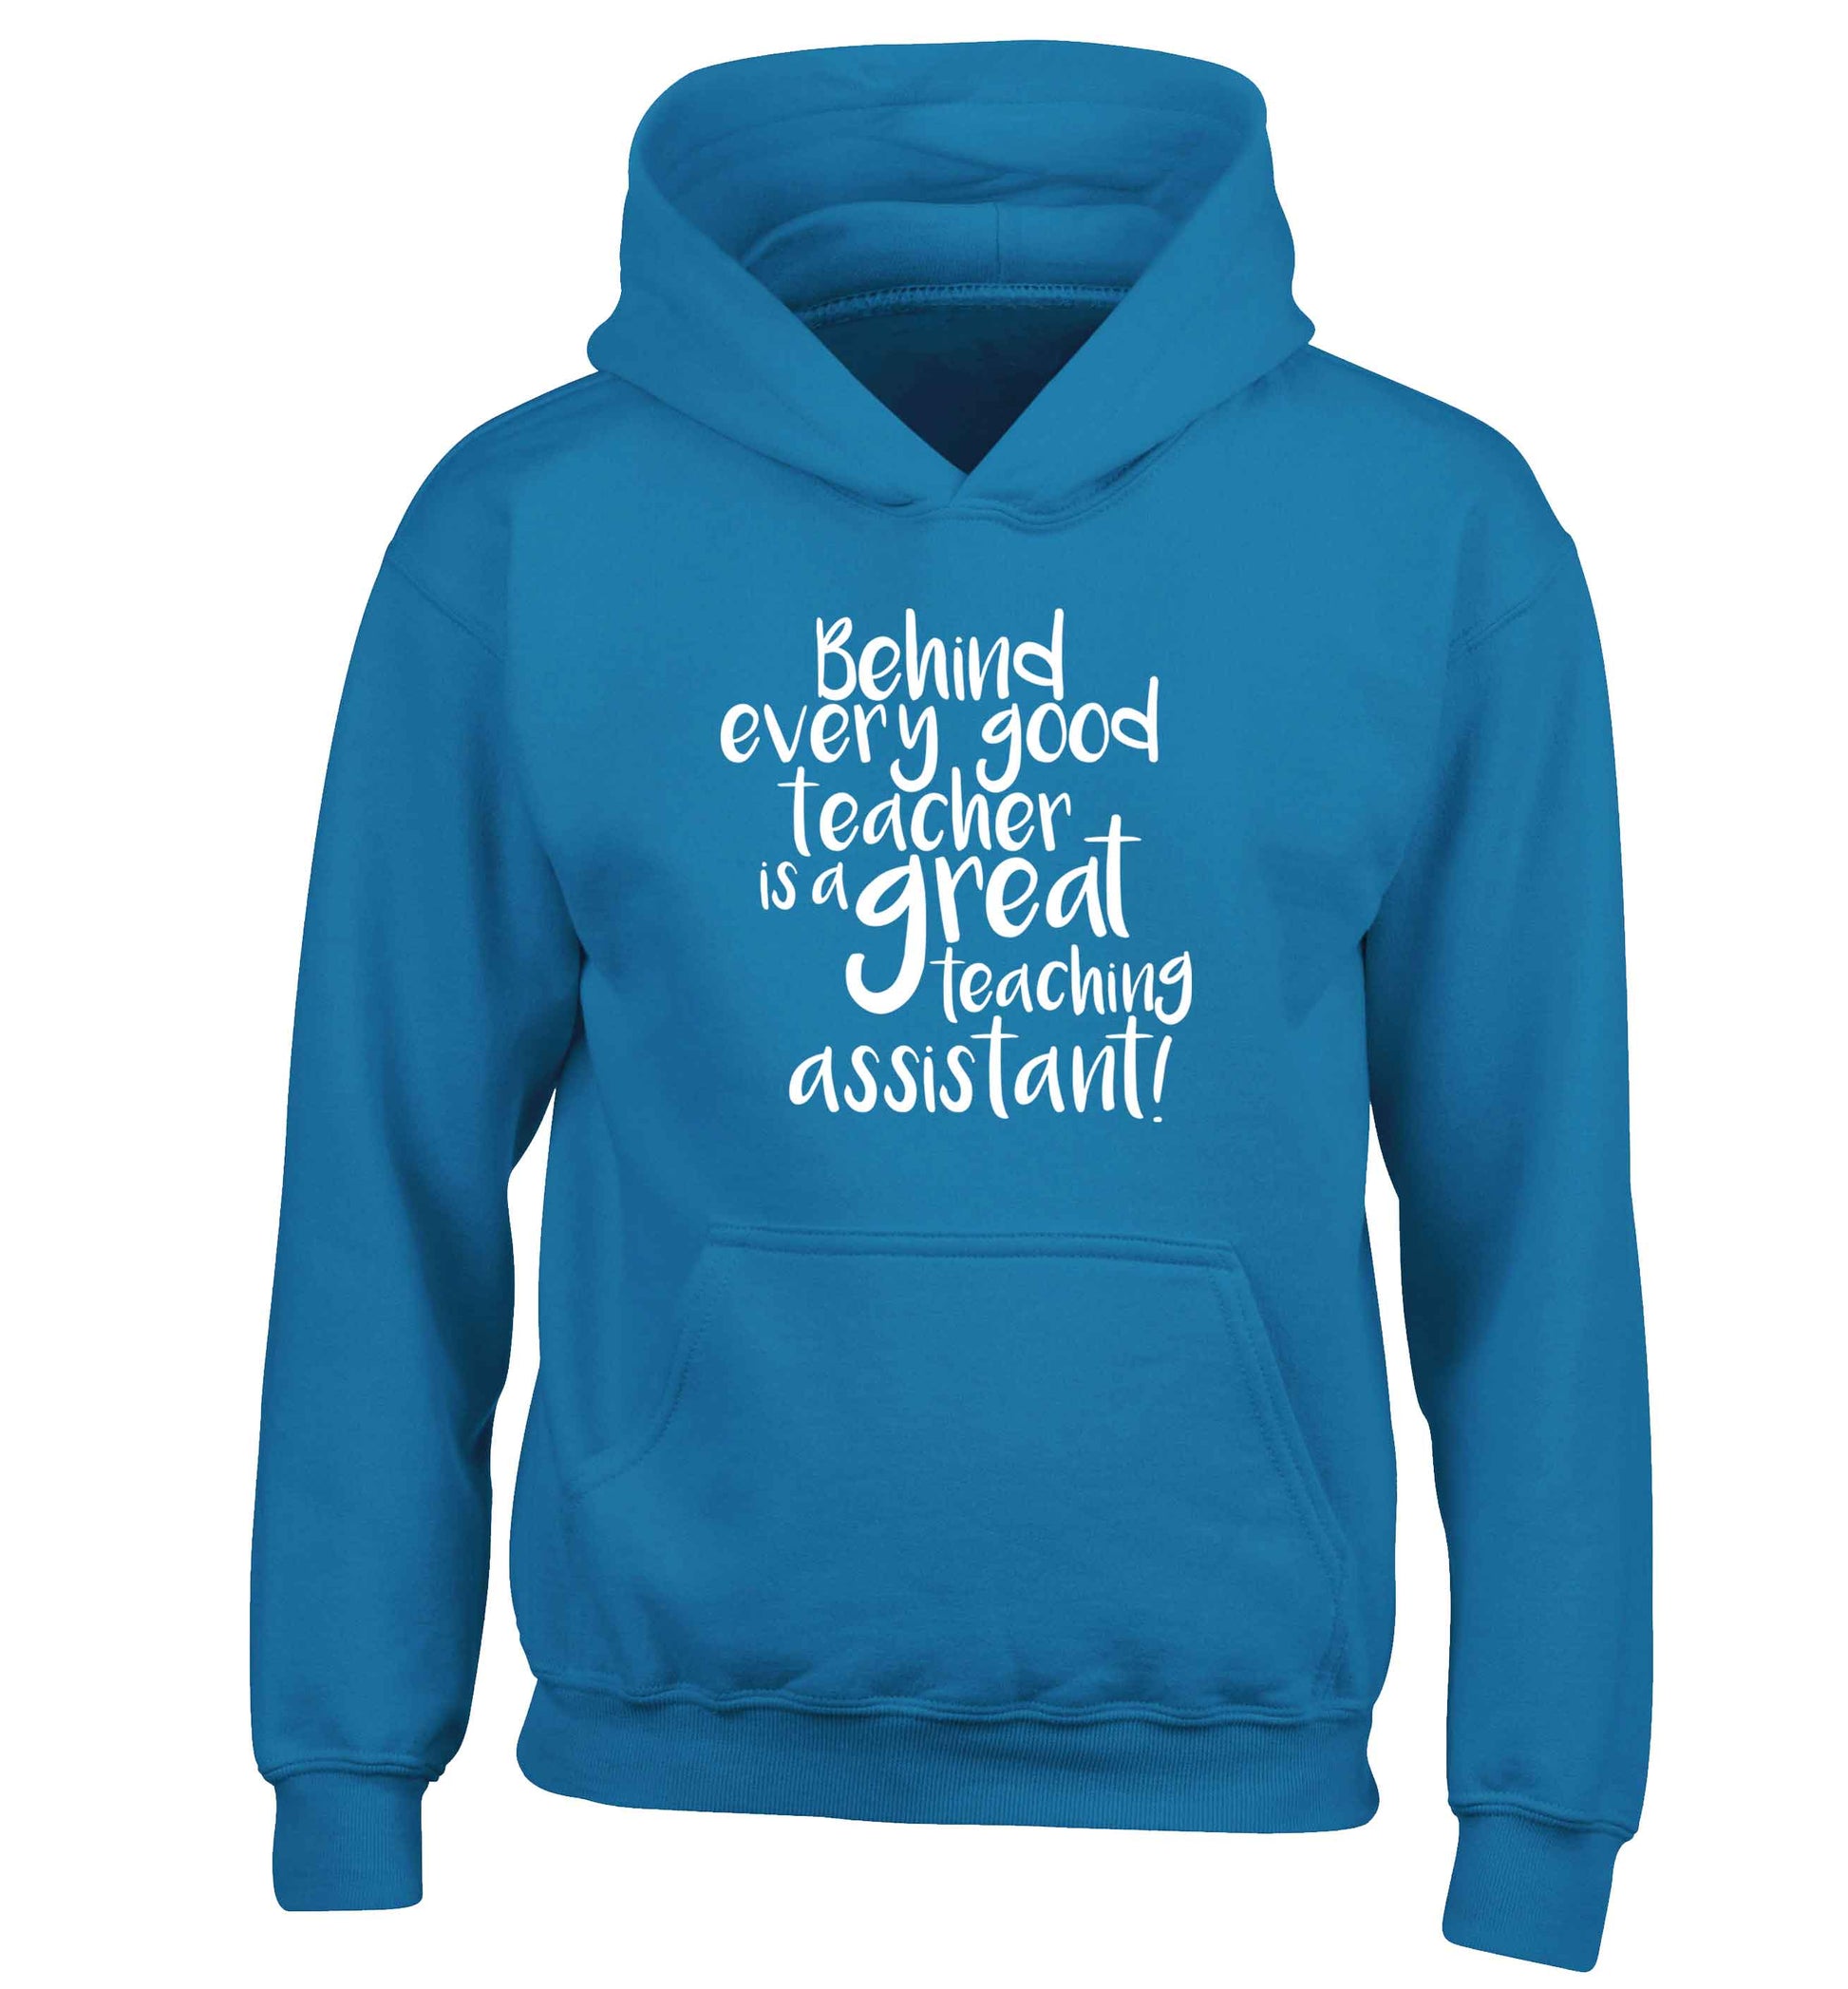 Behind every good teacher is a great teaching assistant children's blue hoodie 12-13 Years